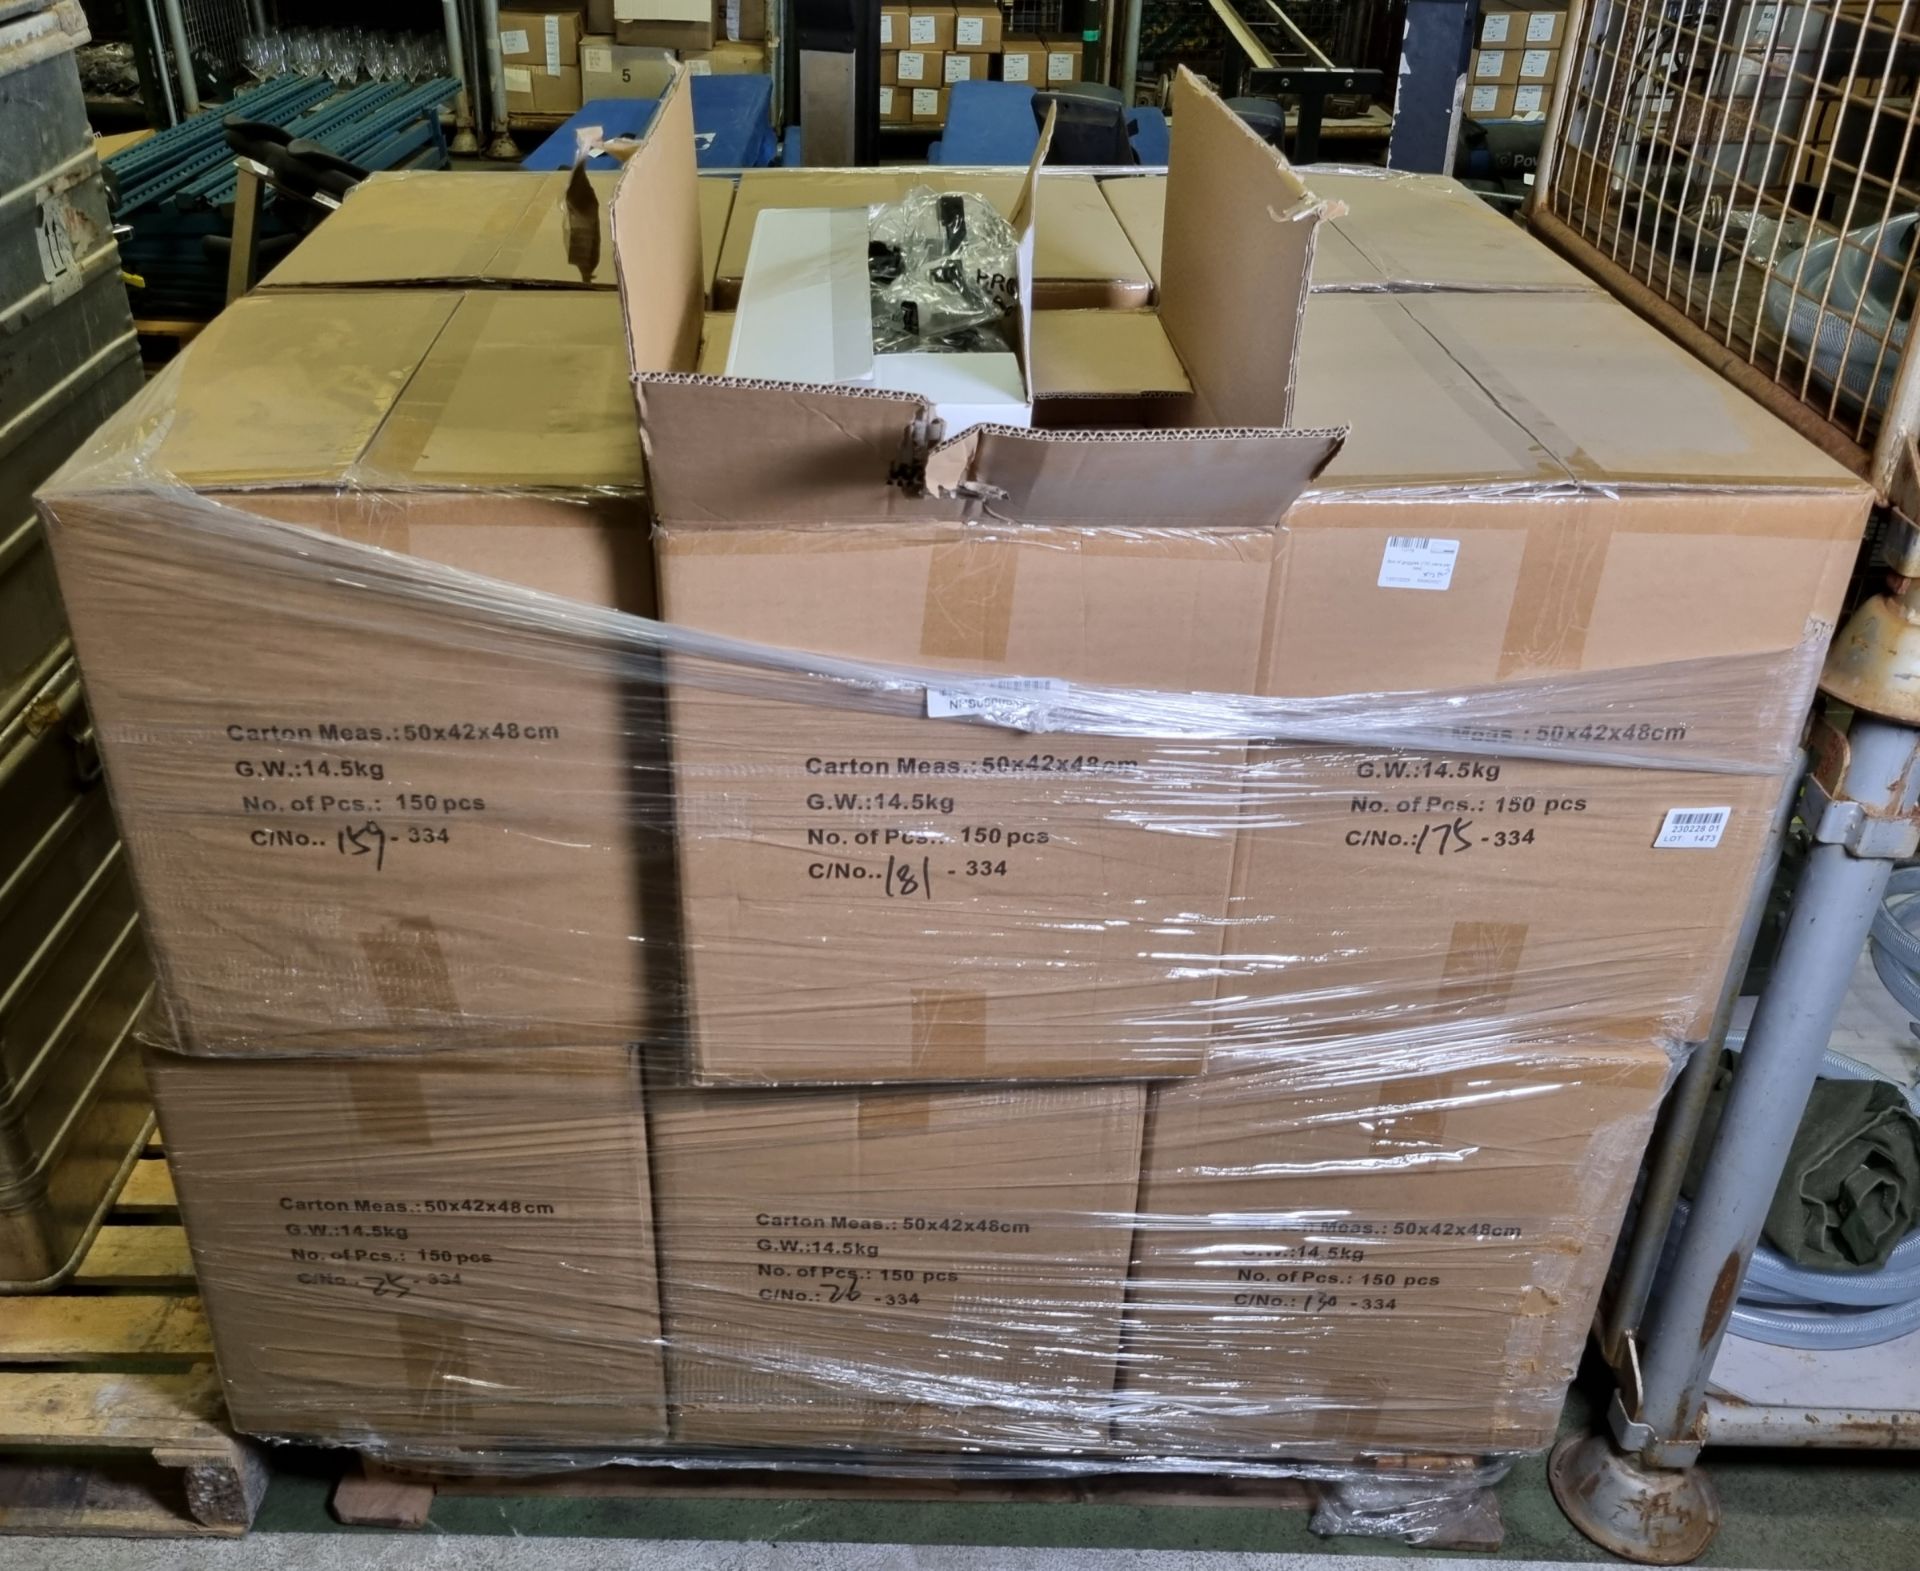 12x boxes of protective goggles (150 pairs per box)